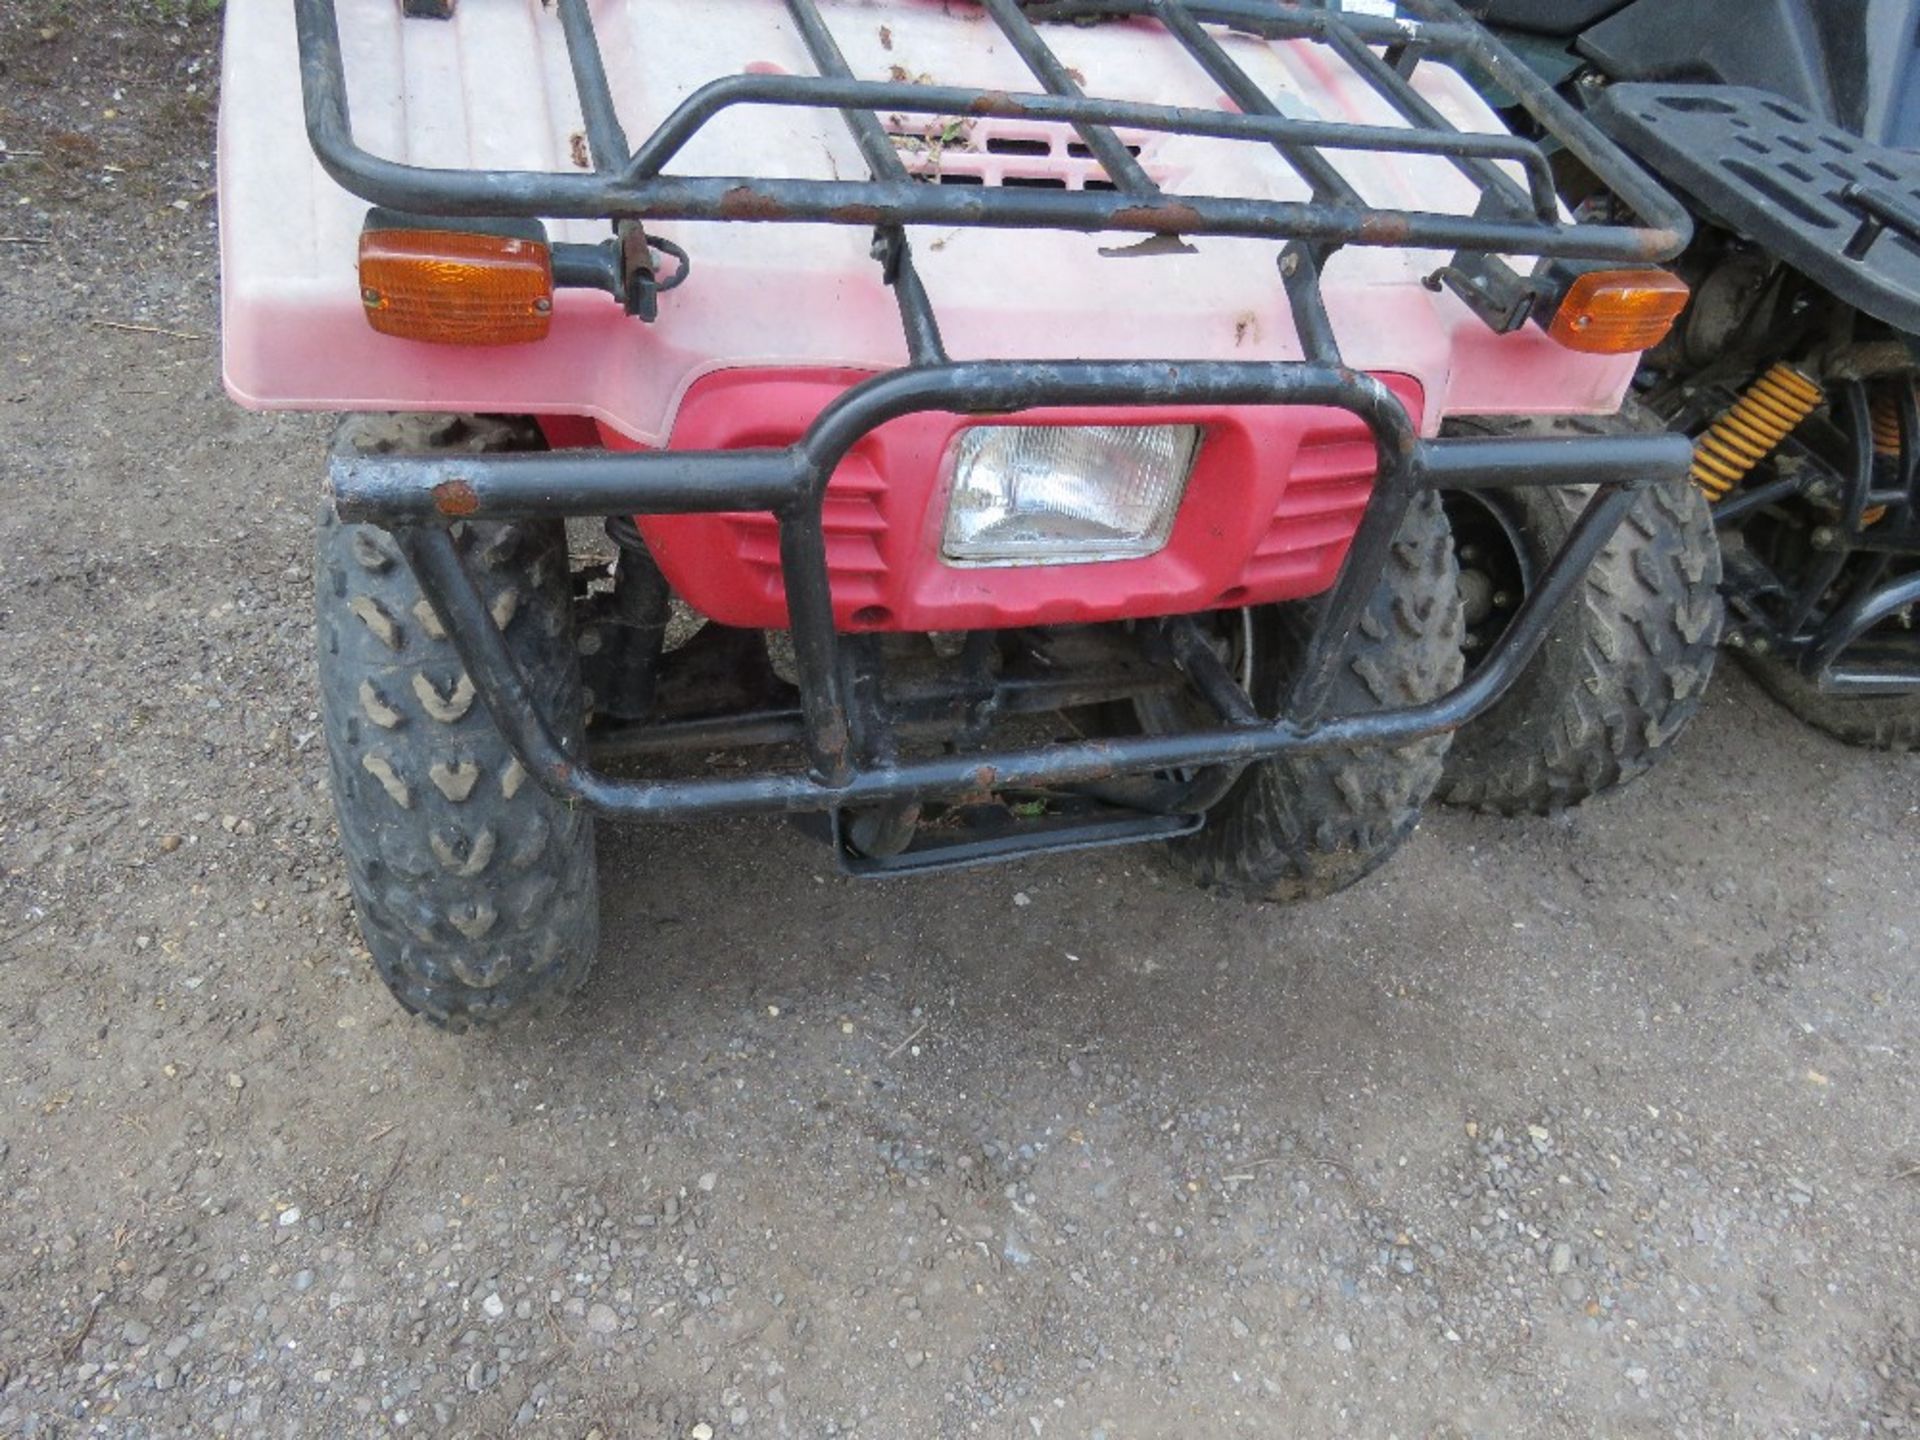 JIANSHE 2WD PETROL ENGINED QUAD BIKE, CONDITION UNKNOWN, SOLD AS NON RUNNER. - Image 2 of 7